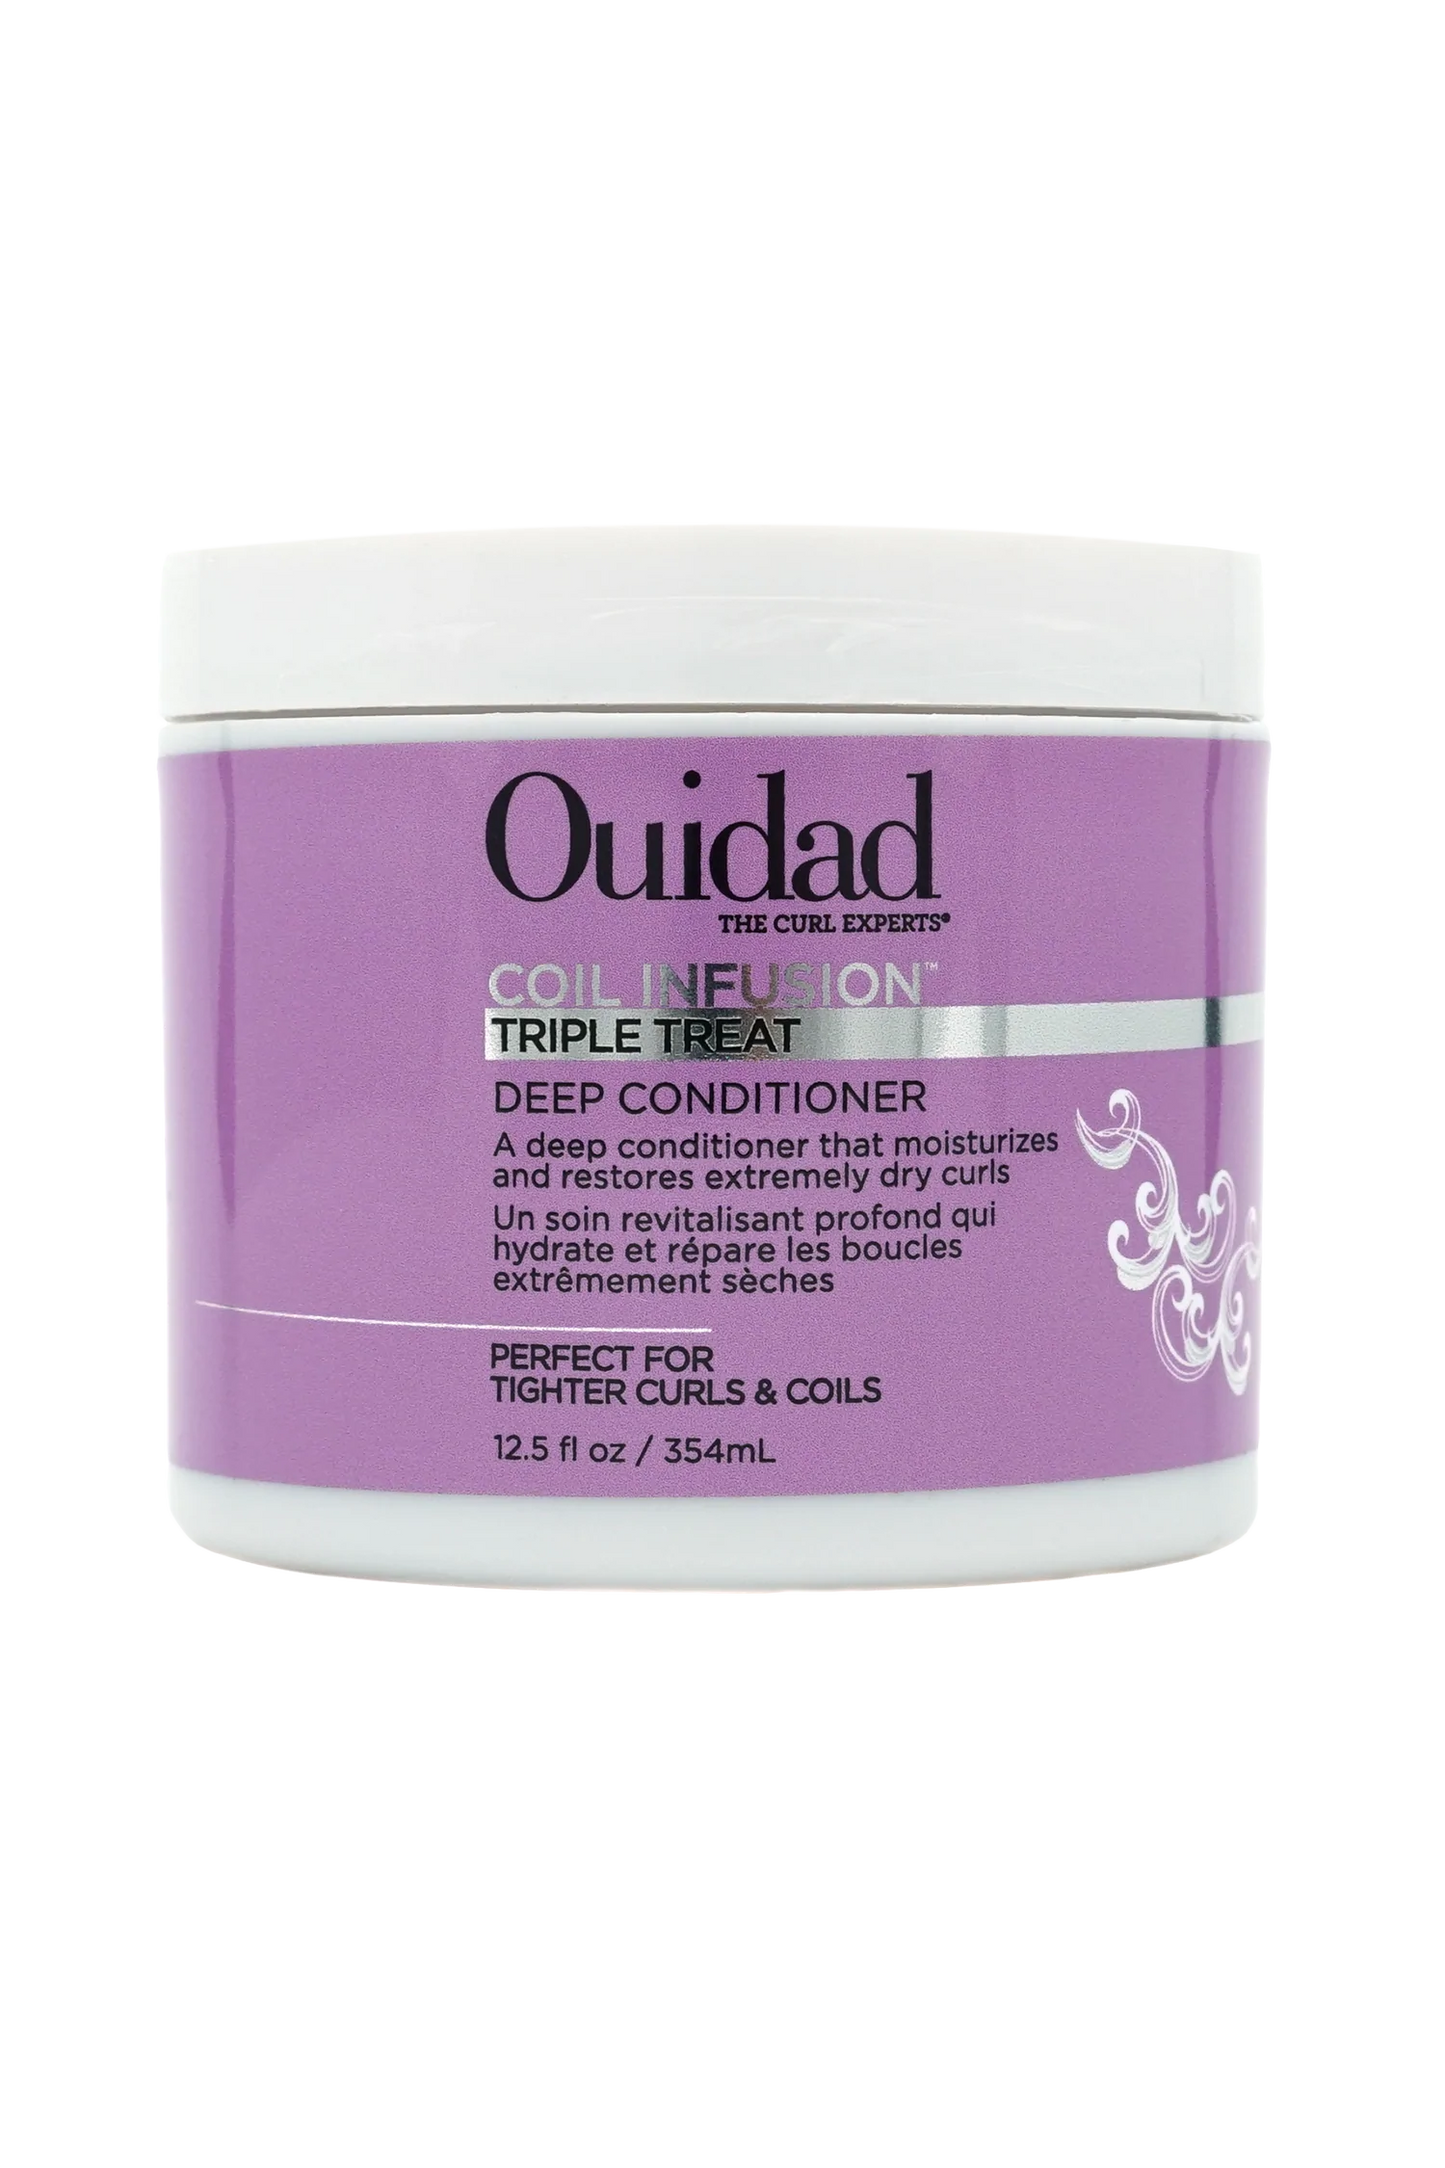 Ouidad Coil Infusion Triple Threat Deep Conditioner